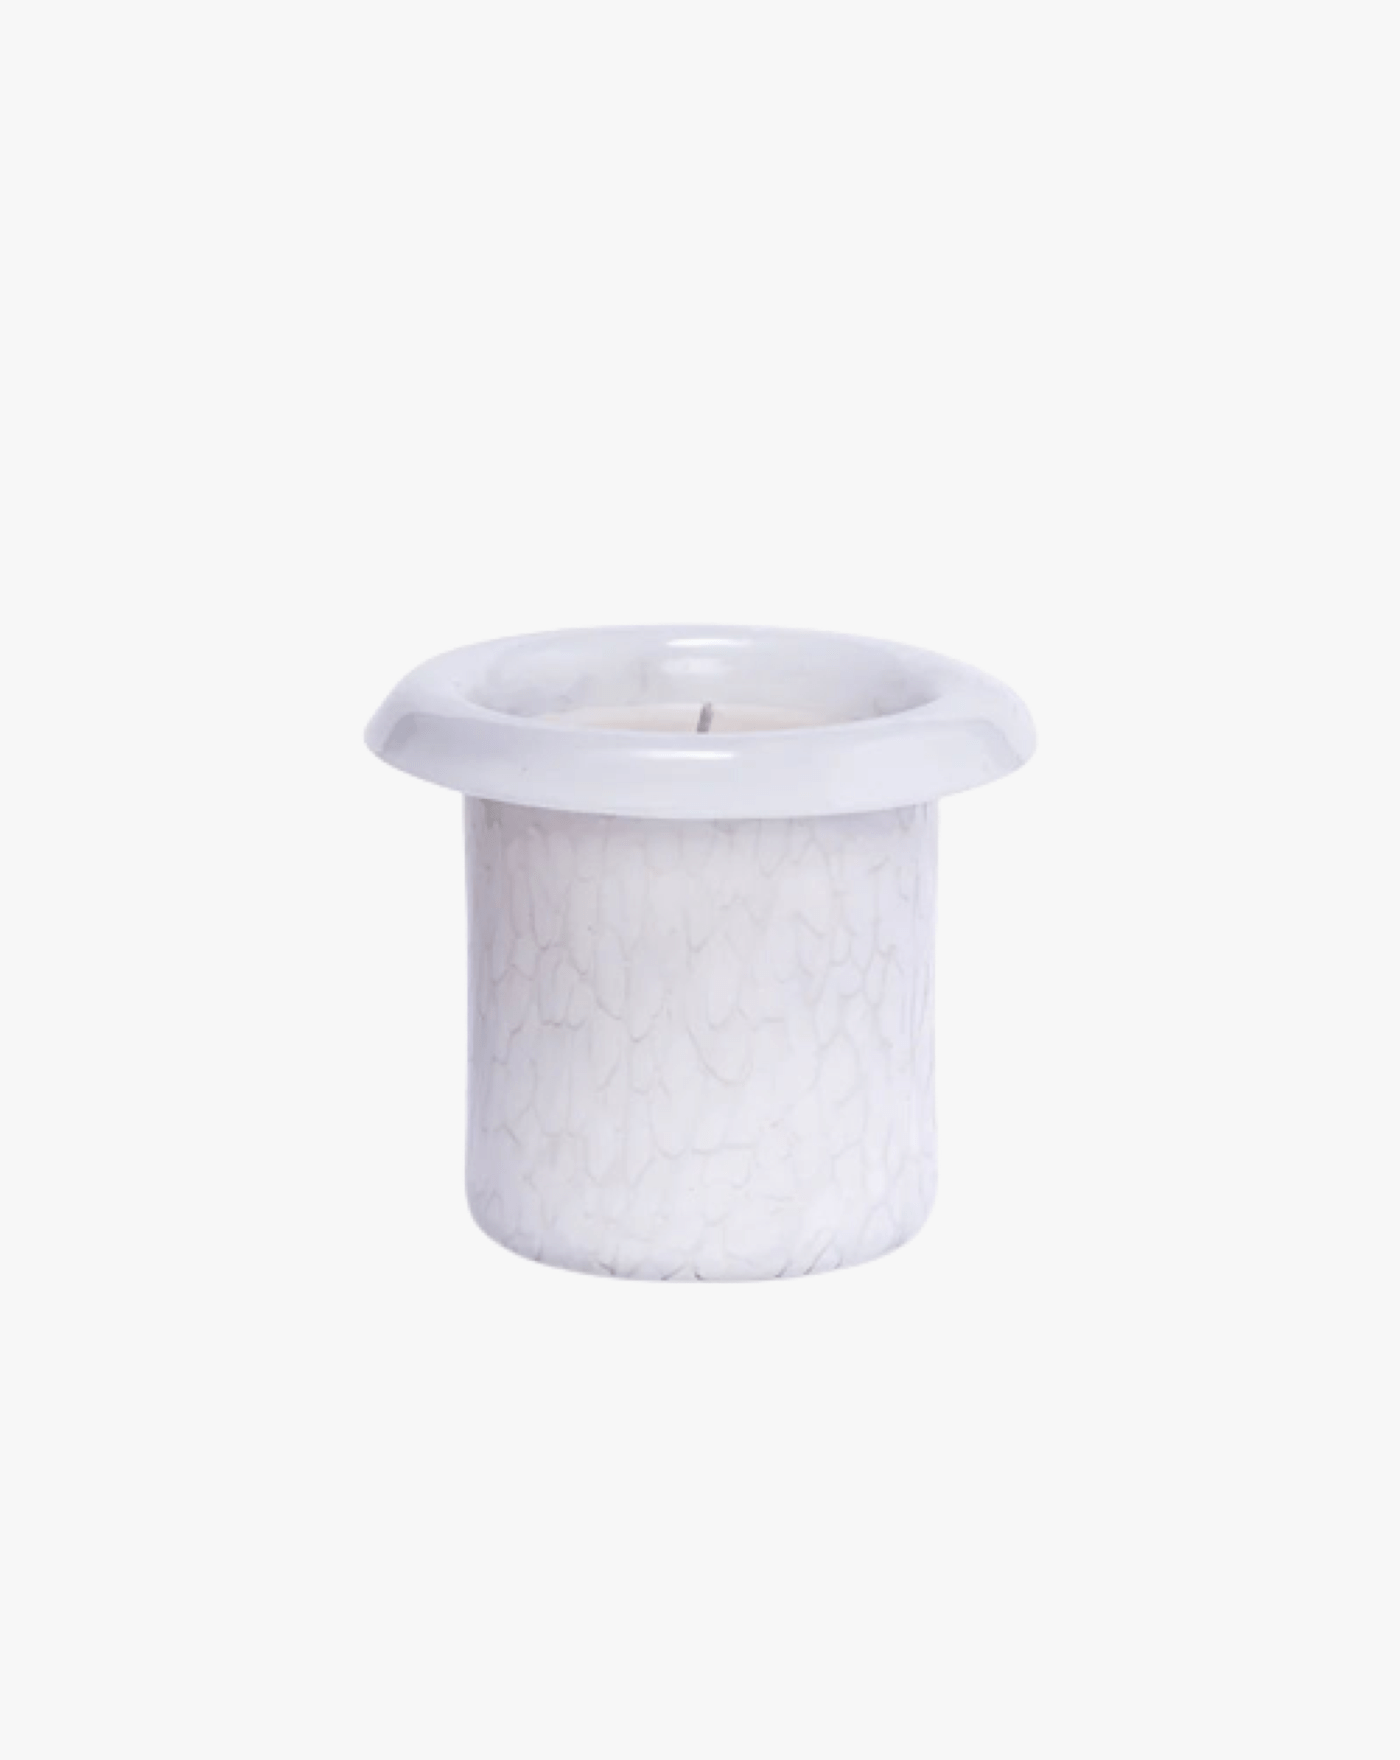 Scented Candles The "600" Candle Aina Kari